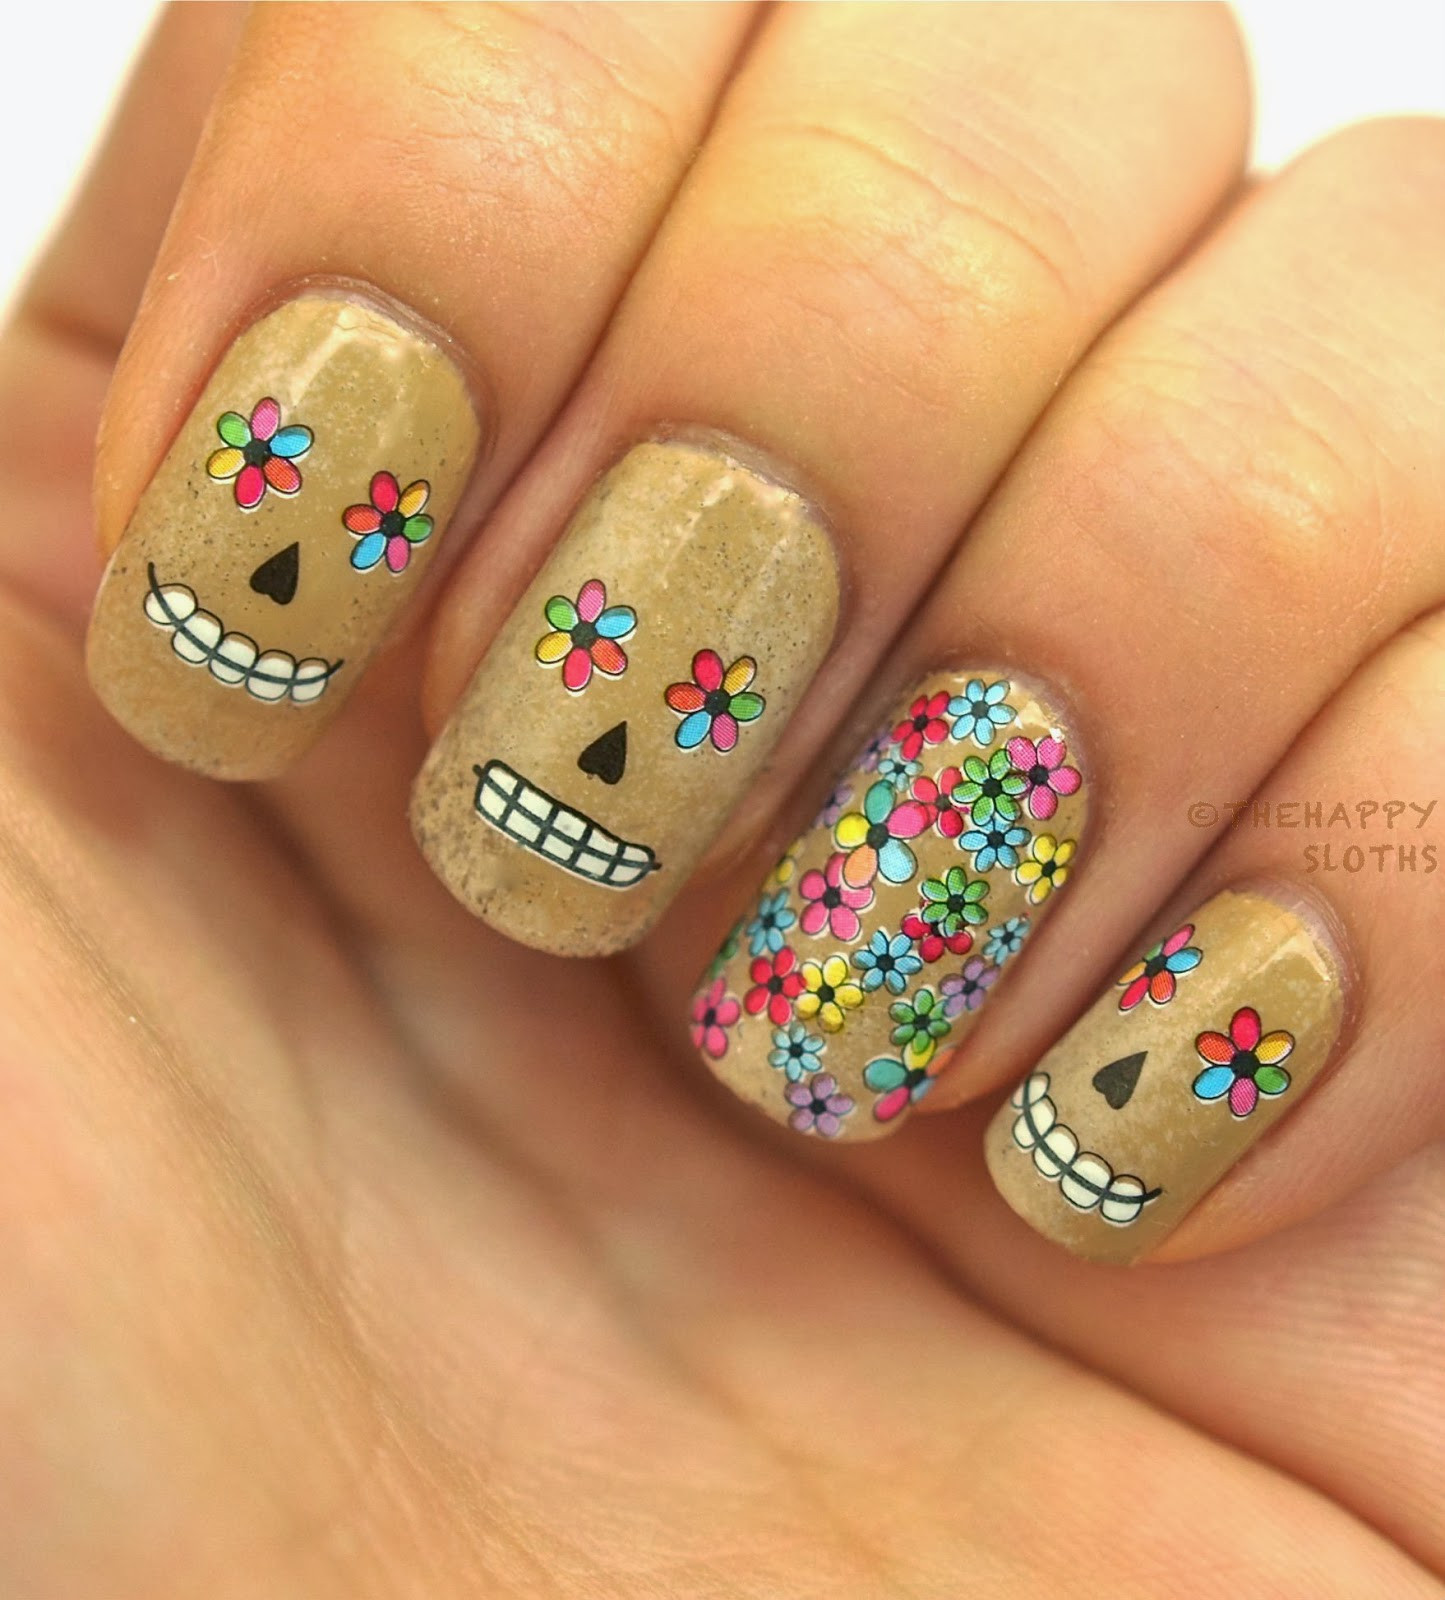 Pretty Nails Bridgeport Pa
 Sugar Skull Nails Manicure Featuring Water Decal Nail